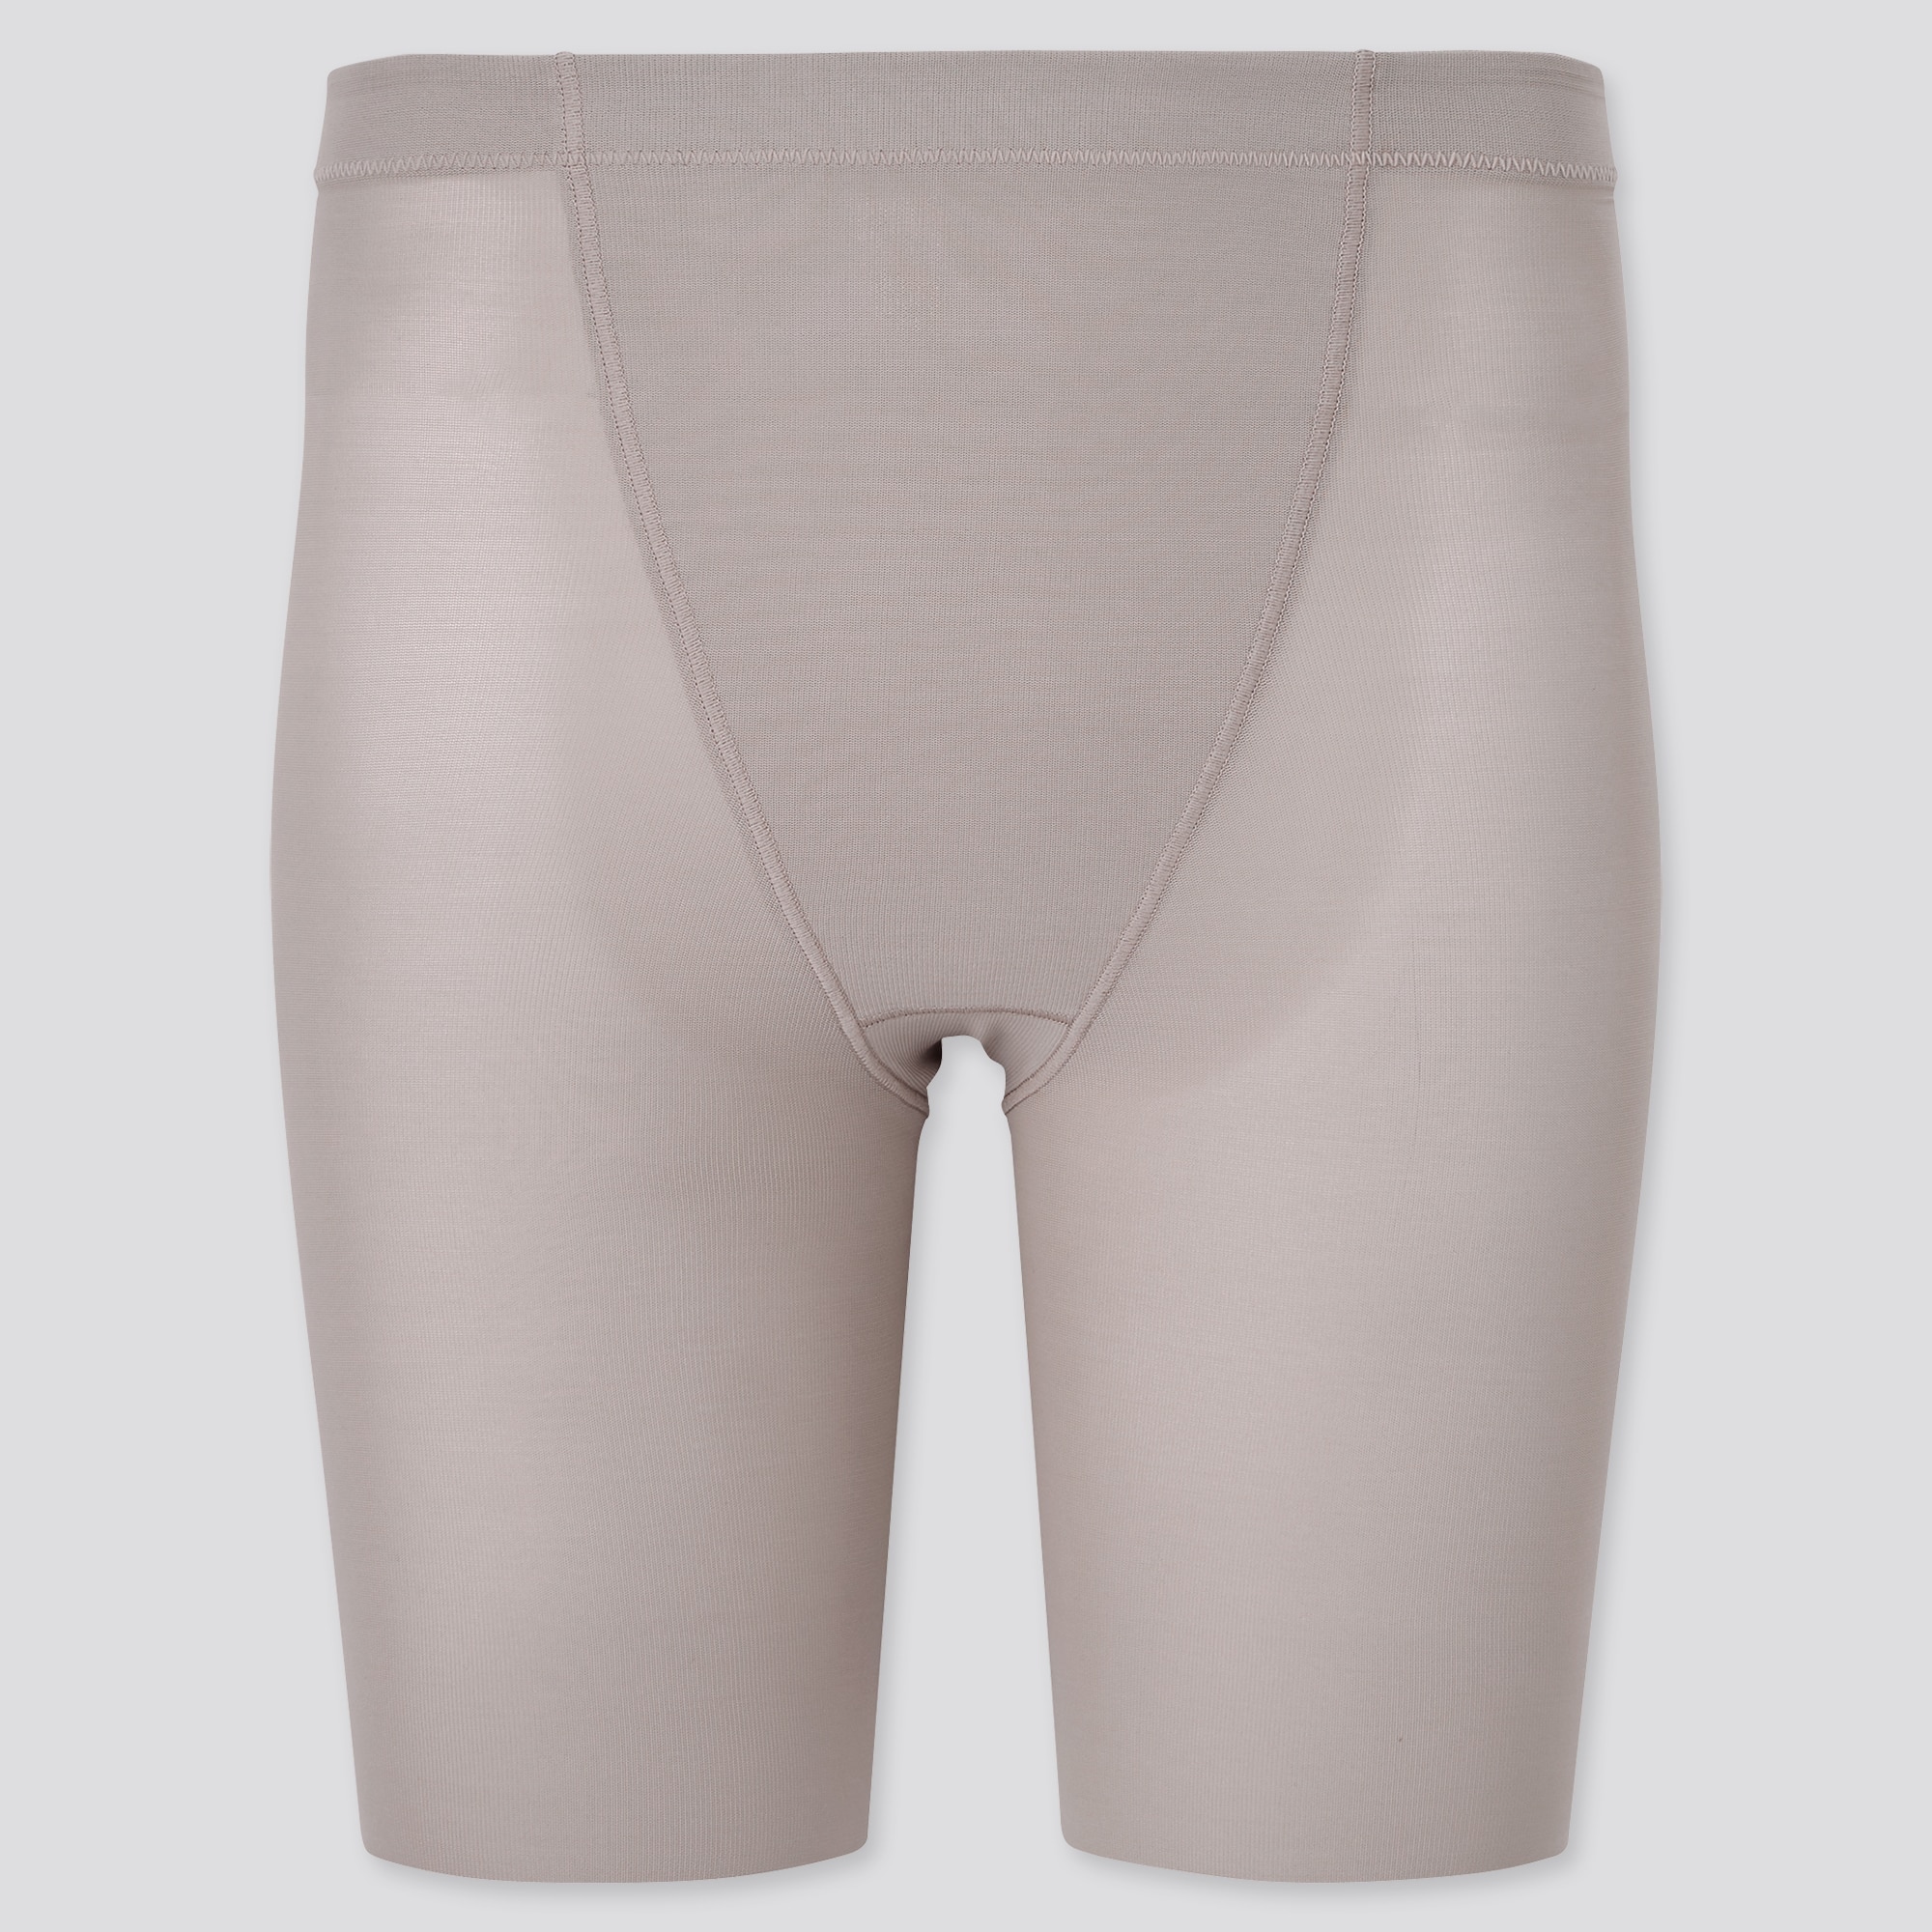 UNIQLO body shaper safety pants Airism